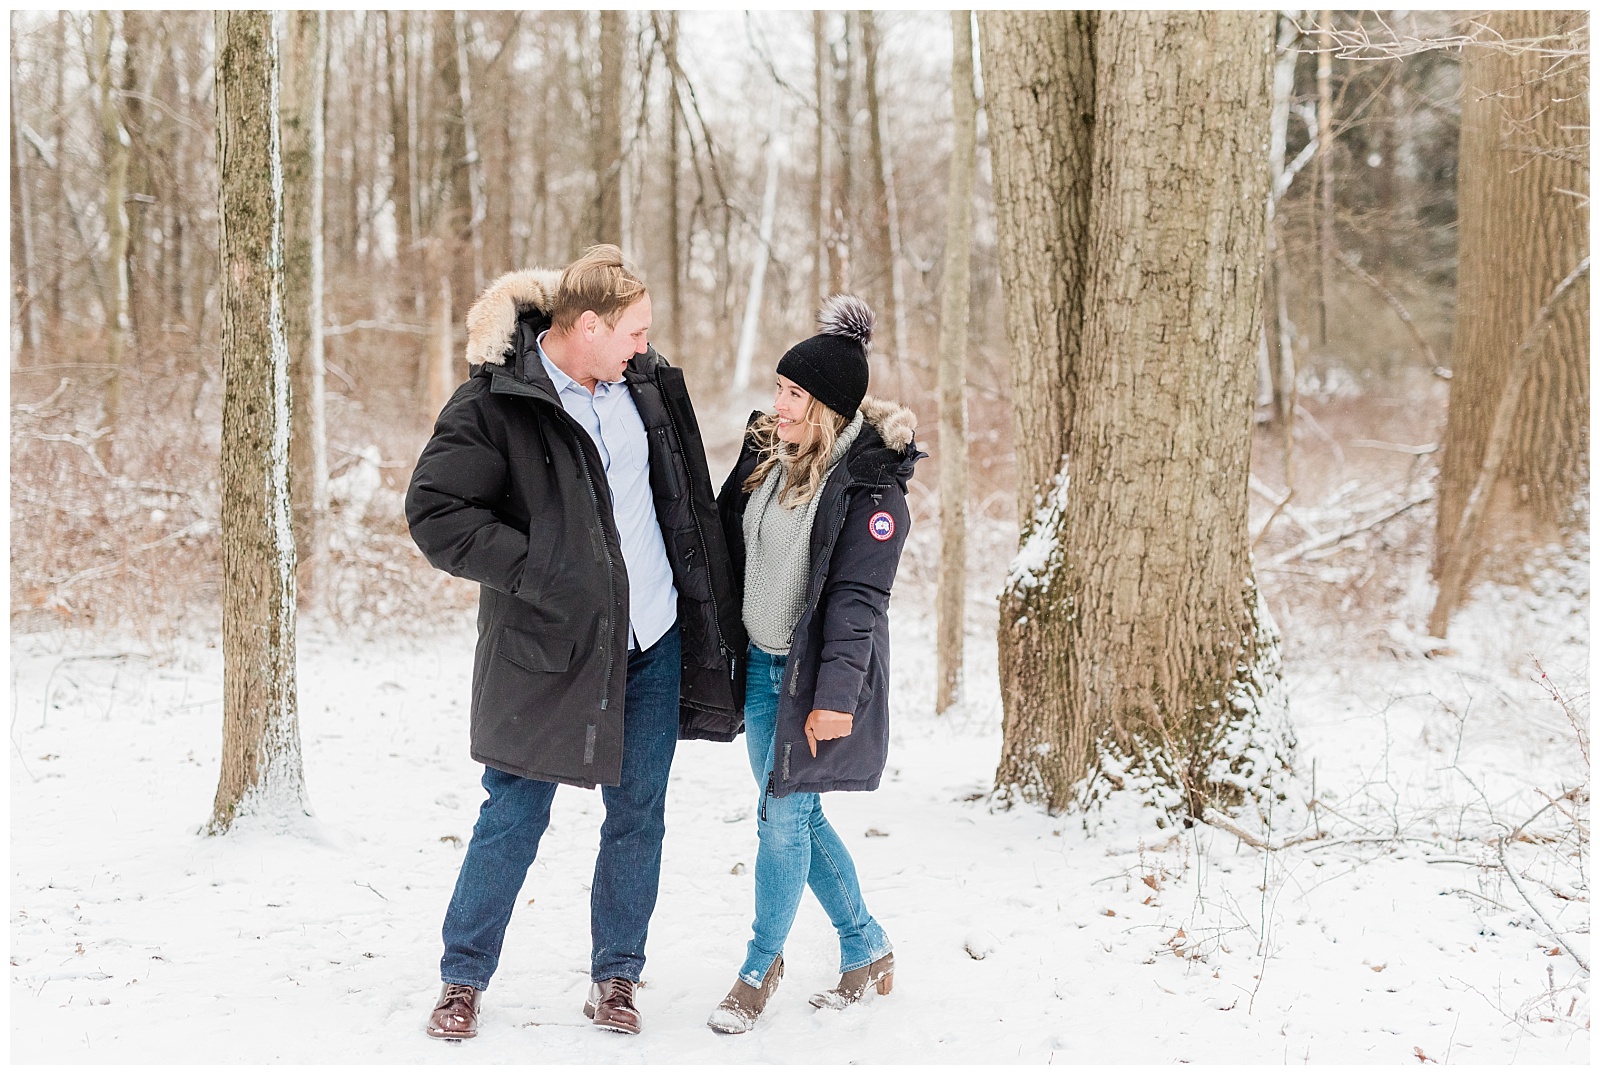 New Jersey Engagement Session, Snowy, Winter, Cozy, Session, Wedding Photographer, Cross Estate Gardens, Snow, Wintry, Light and Airy, Woods, Forest